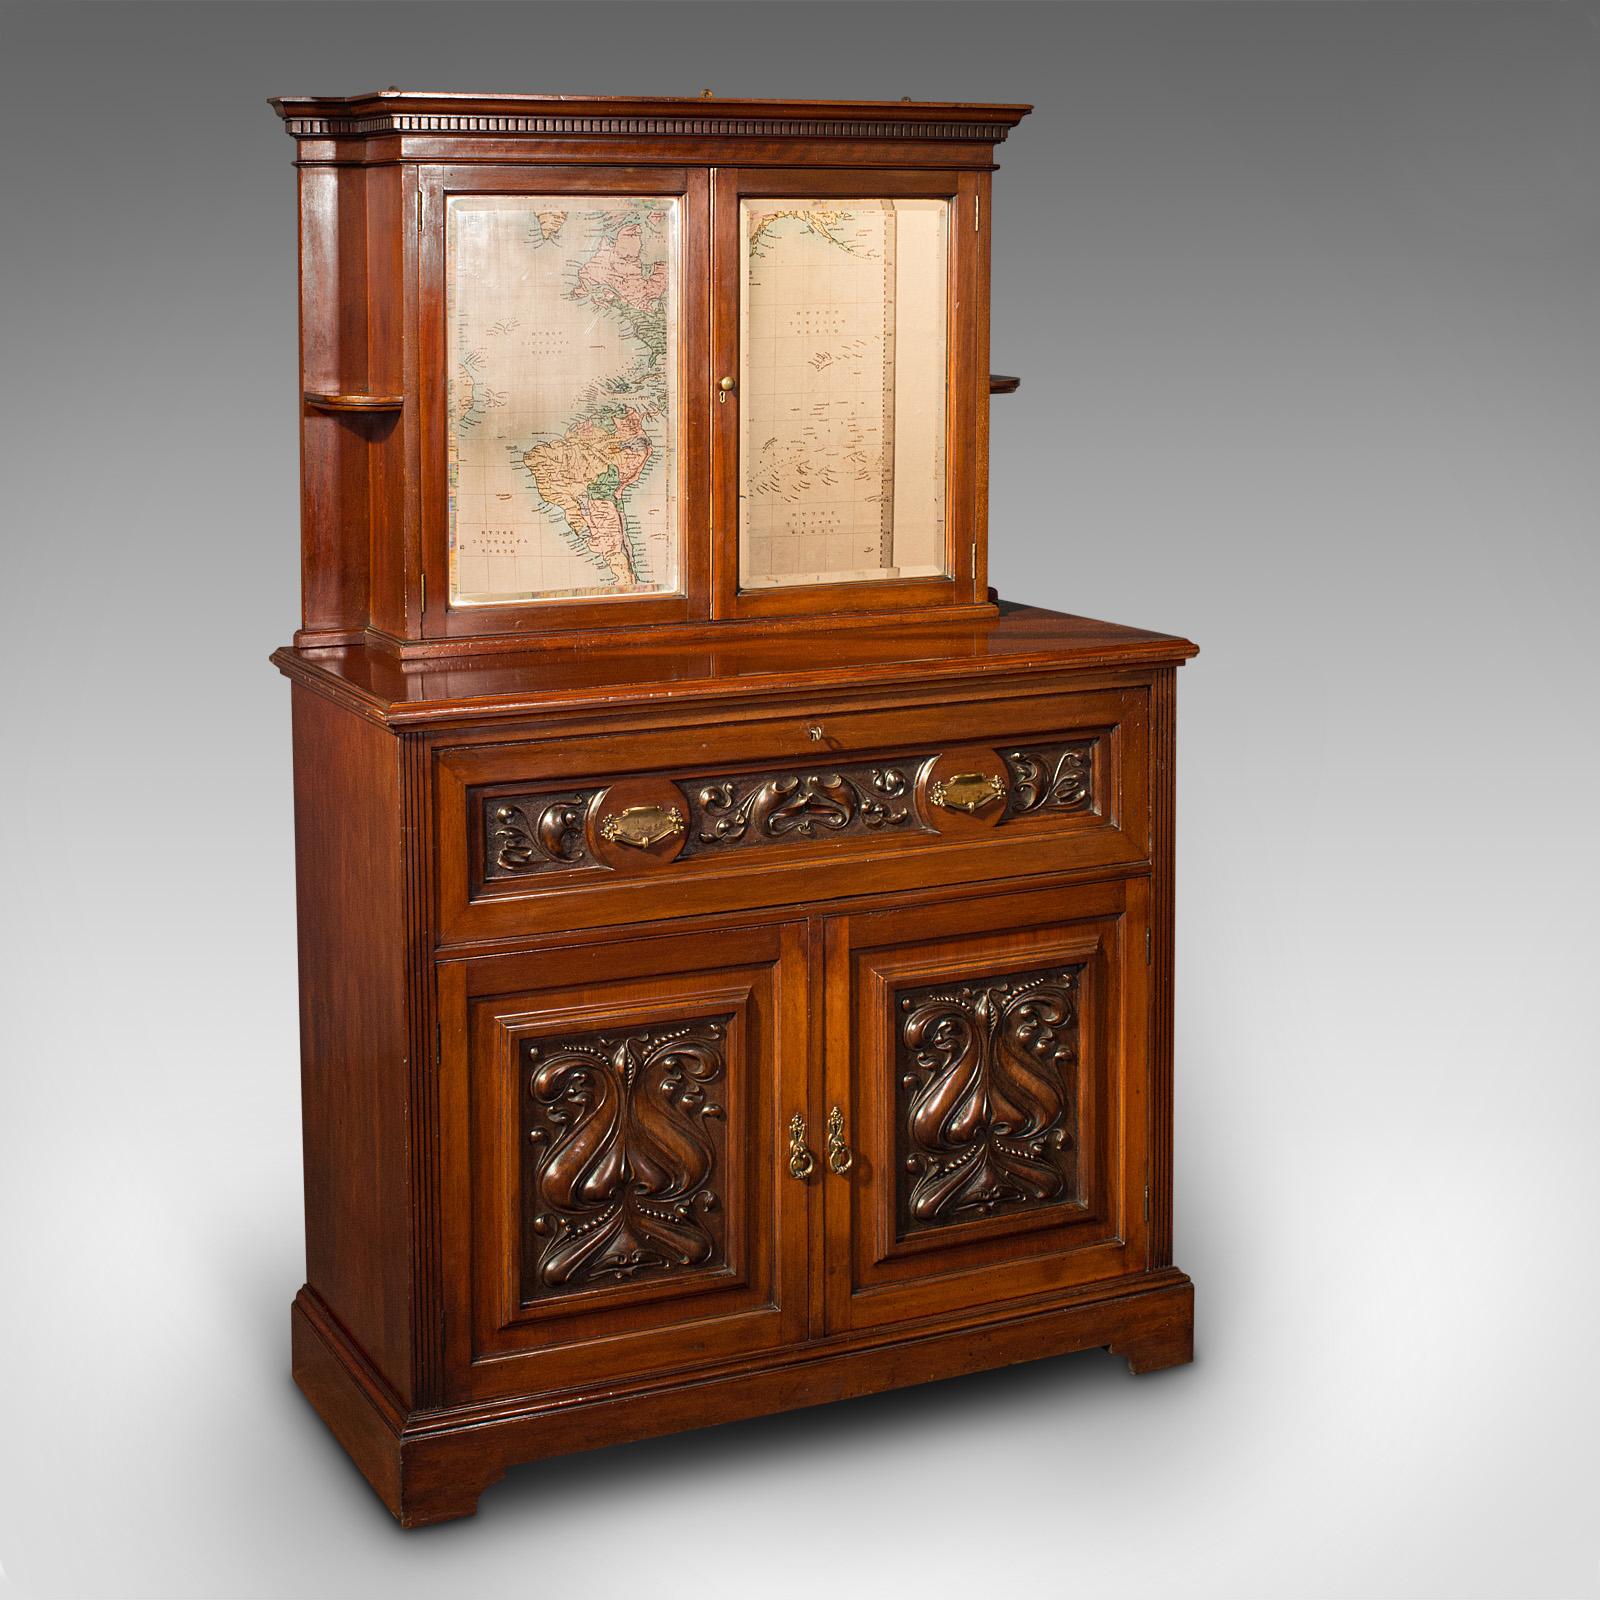 This is an antique secretaire sideboard. An English, mahogany drop-front correspondence cabinet, dating to the late Victorian period, circa 1900.

Of excellent proportion and graced with Art Nouveau taste
Displays a desirable aged patina and in